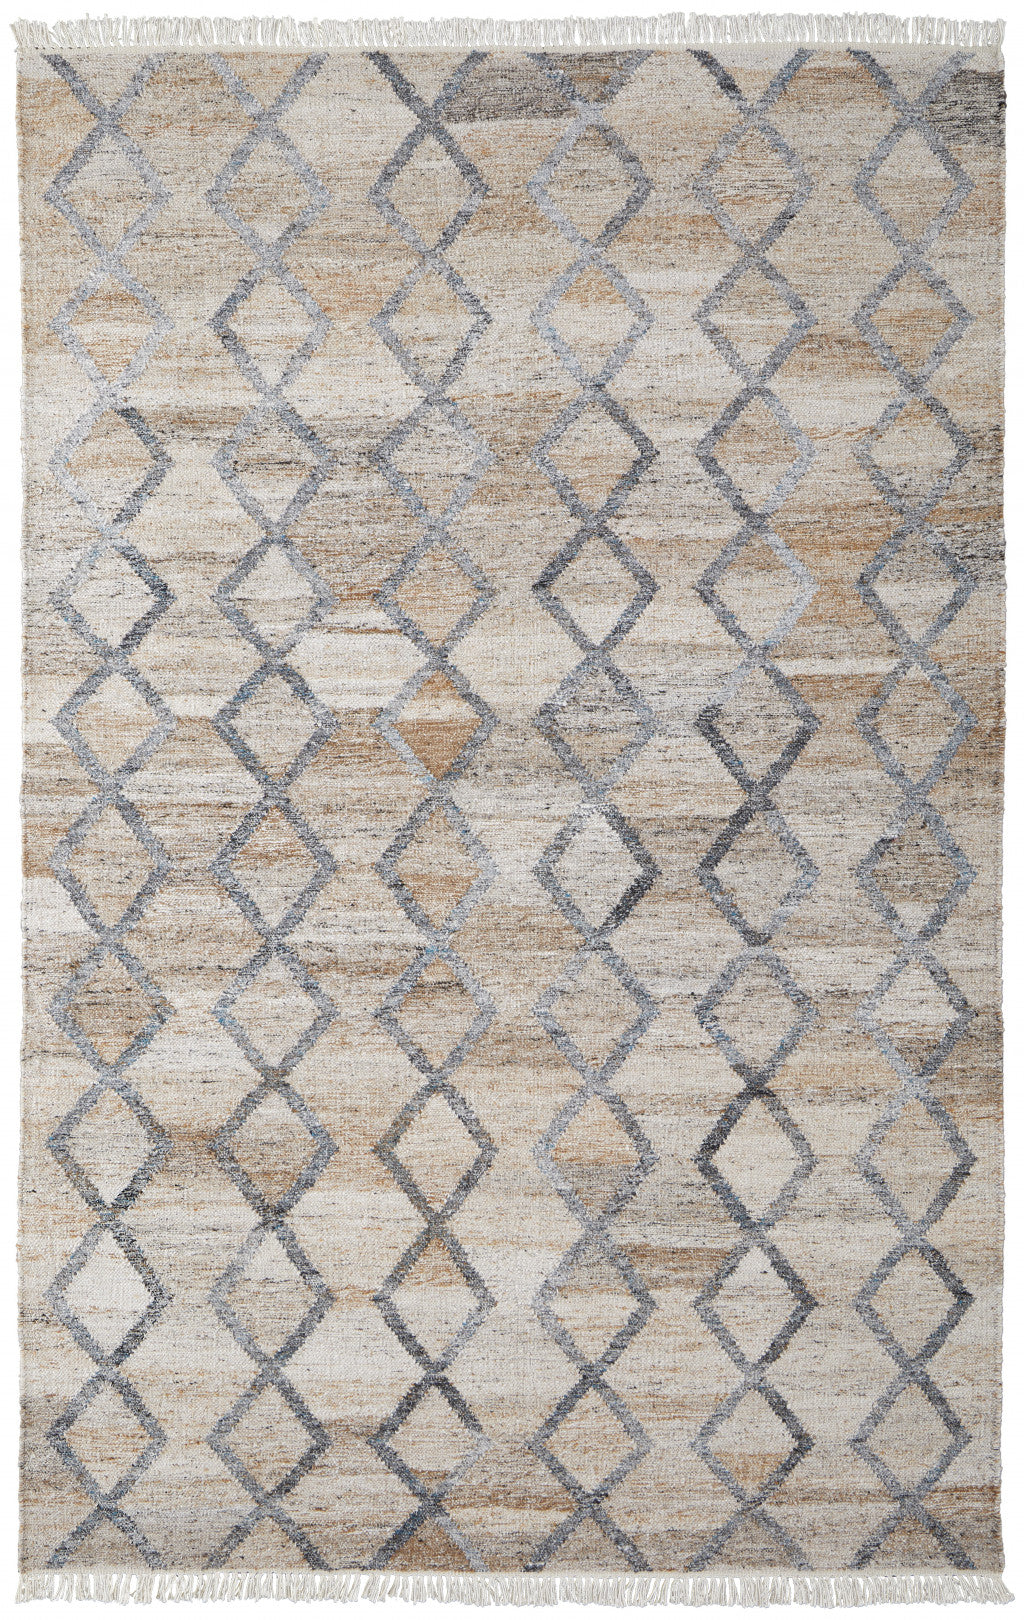 Gray Ivory And Tan Geometric Hand Woven Stain Resistant Area Rug With Fringe - 4' x 6'